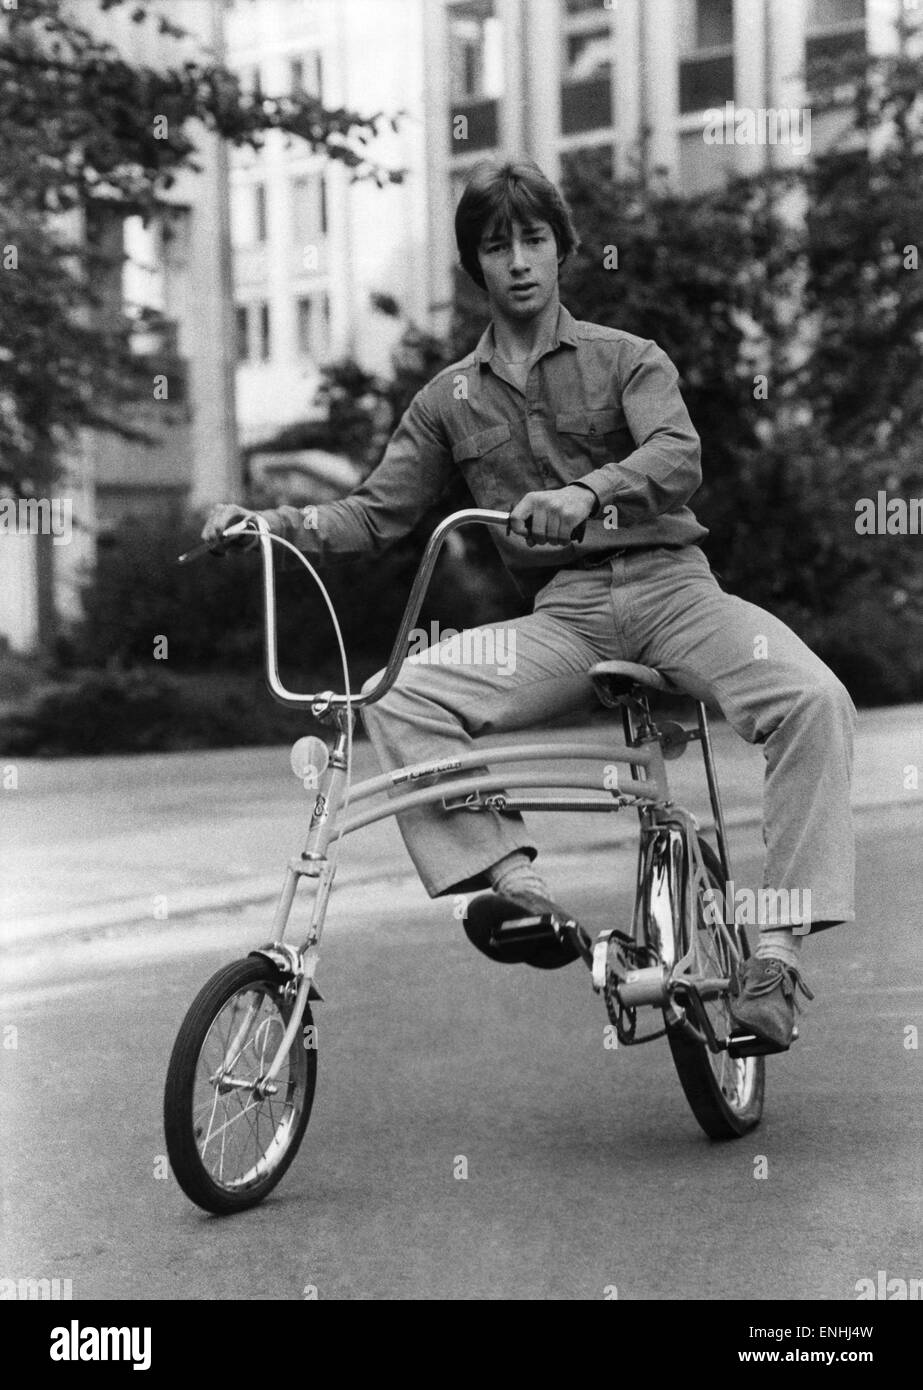 Safety experts are up in arms over a new-style 'fun' bike which they say is a danger to children. They're report about the American-designed Swing Bike, a trick cycle being publicised by singers The Osmonds as 'a new fun-filled experience for British kids Stock Photo